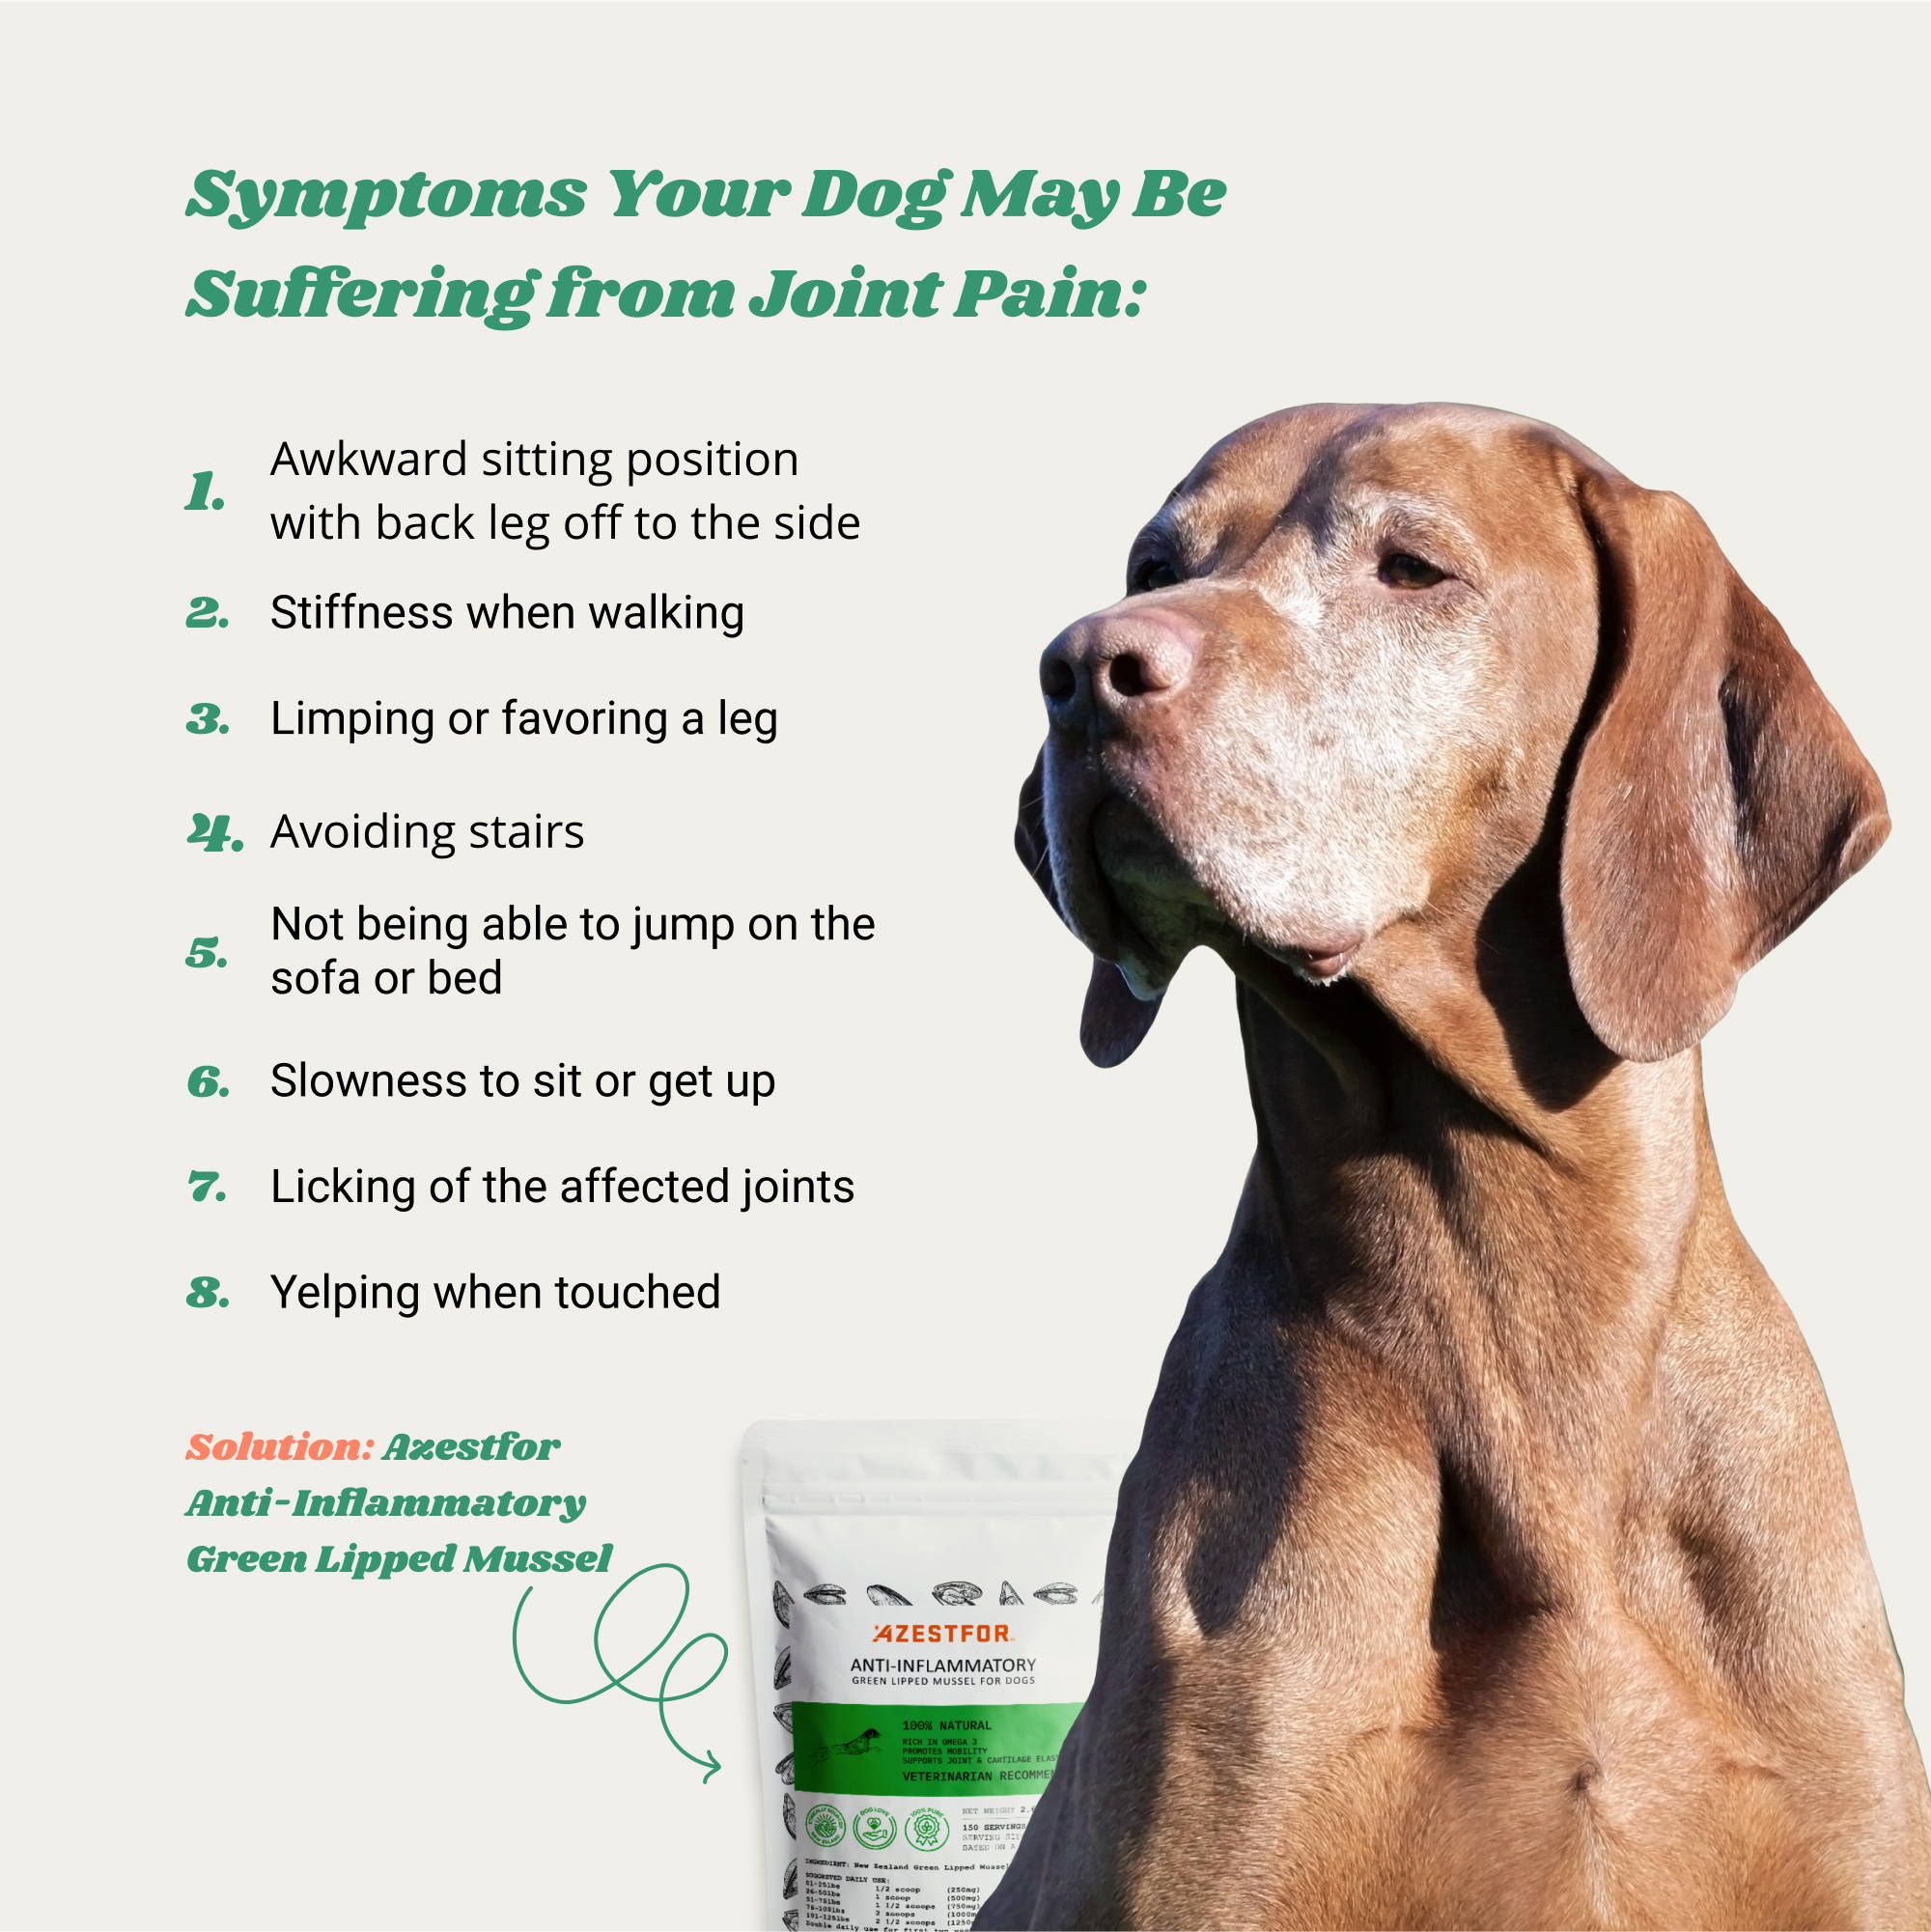 8 Symptoms Your Dog May Be Suffering from Joint Pain: 1. Awkward sitting position; 2. Stiffness when walking; 3. Limping or favoring leg; 4. Avoiding stairs; 5. Not being able to jump on the sofa or bed; 6. Slowness to sit or get up; 7. Licking of the affected joints; 8. Yelping when touched. Solution: Azestfor Anti-Inflammatory Green Lipped Mussel